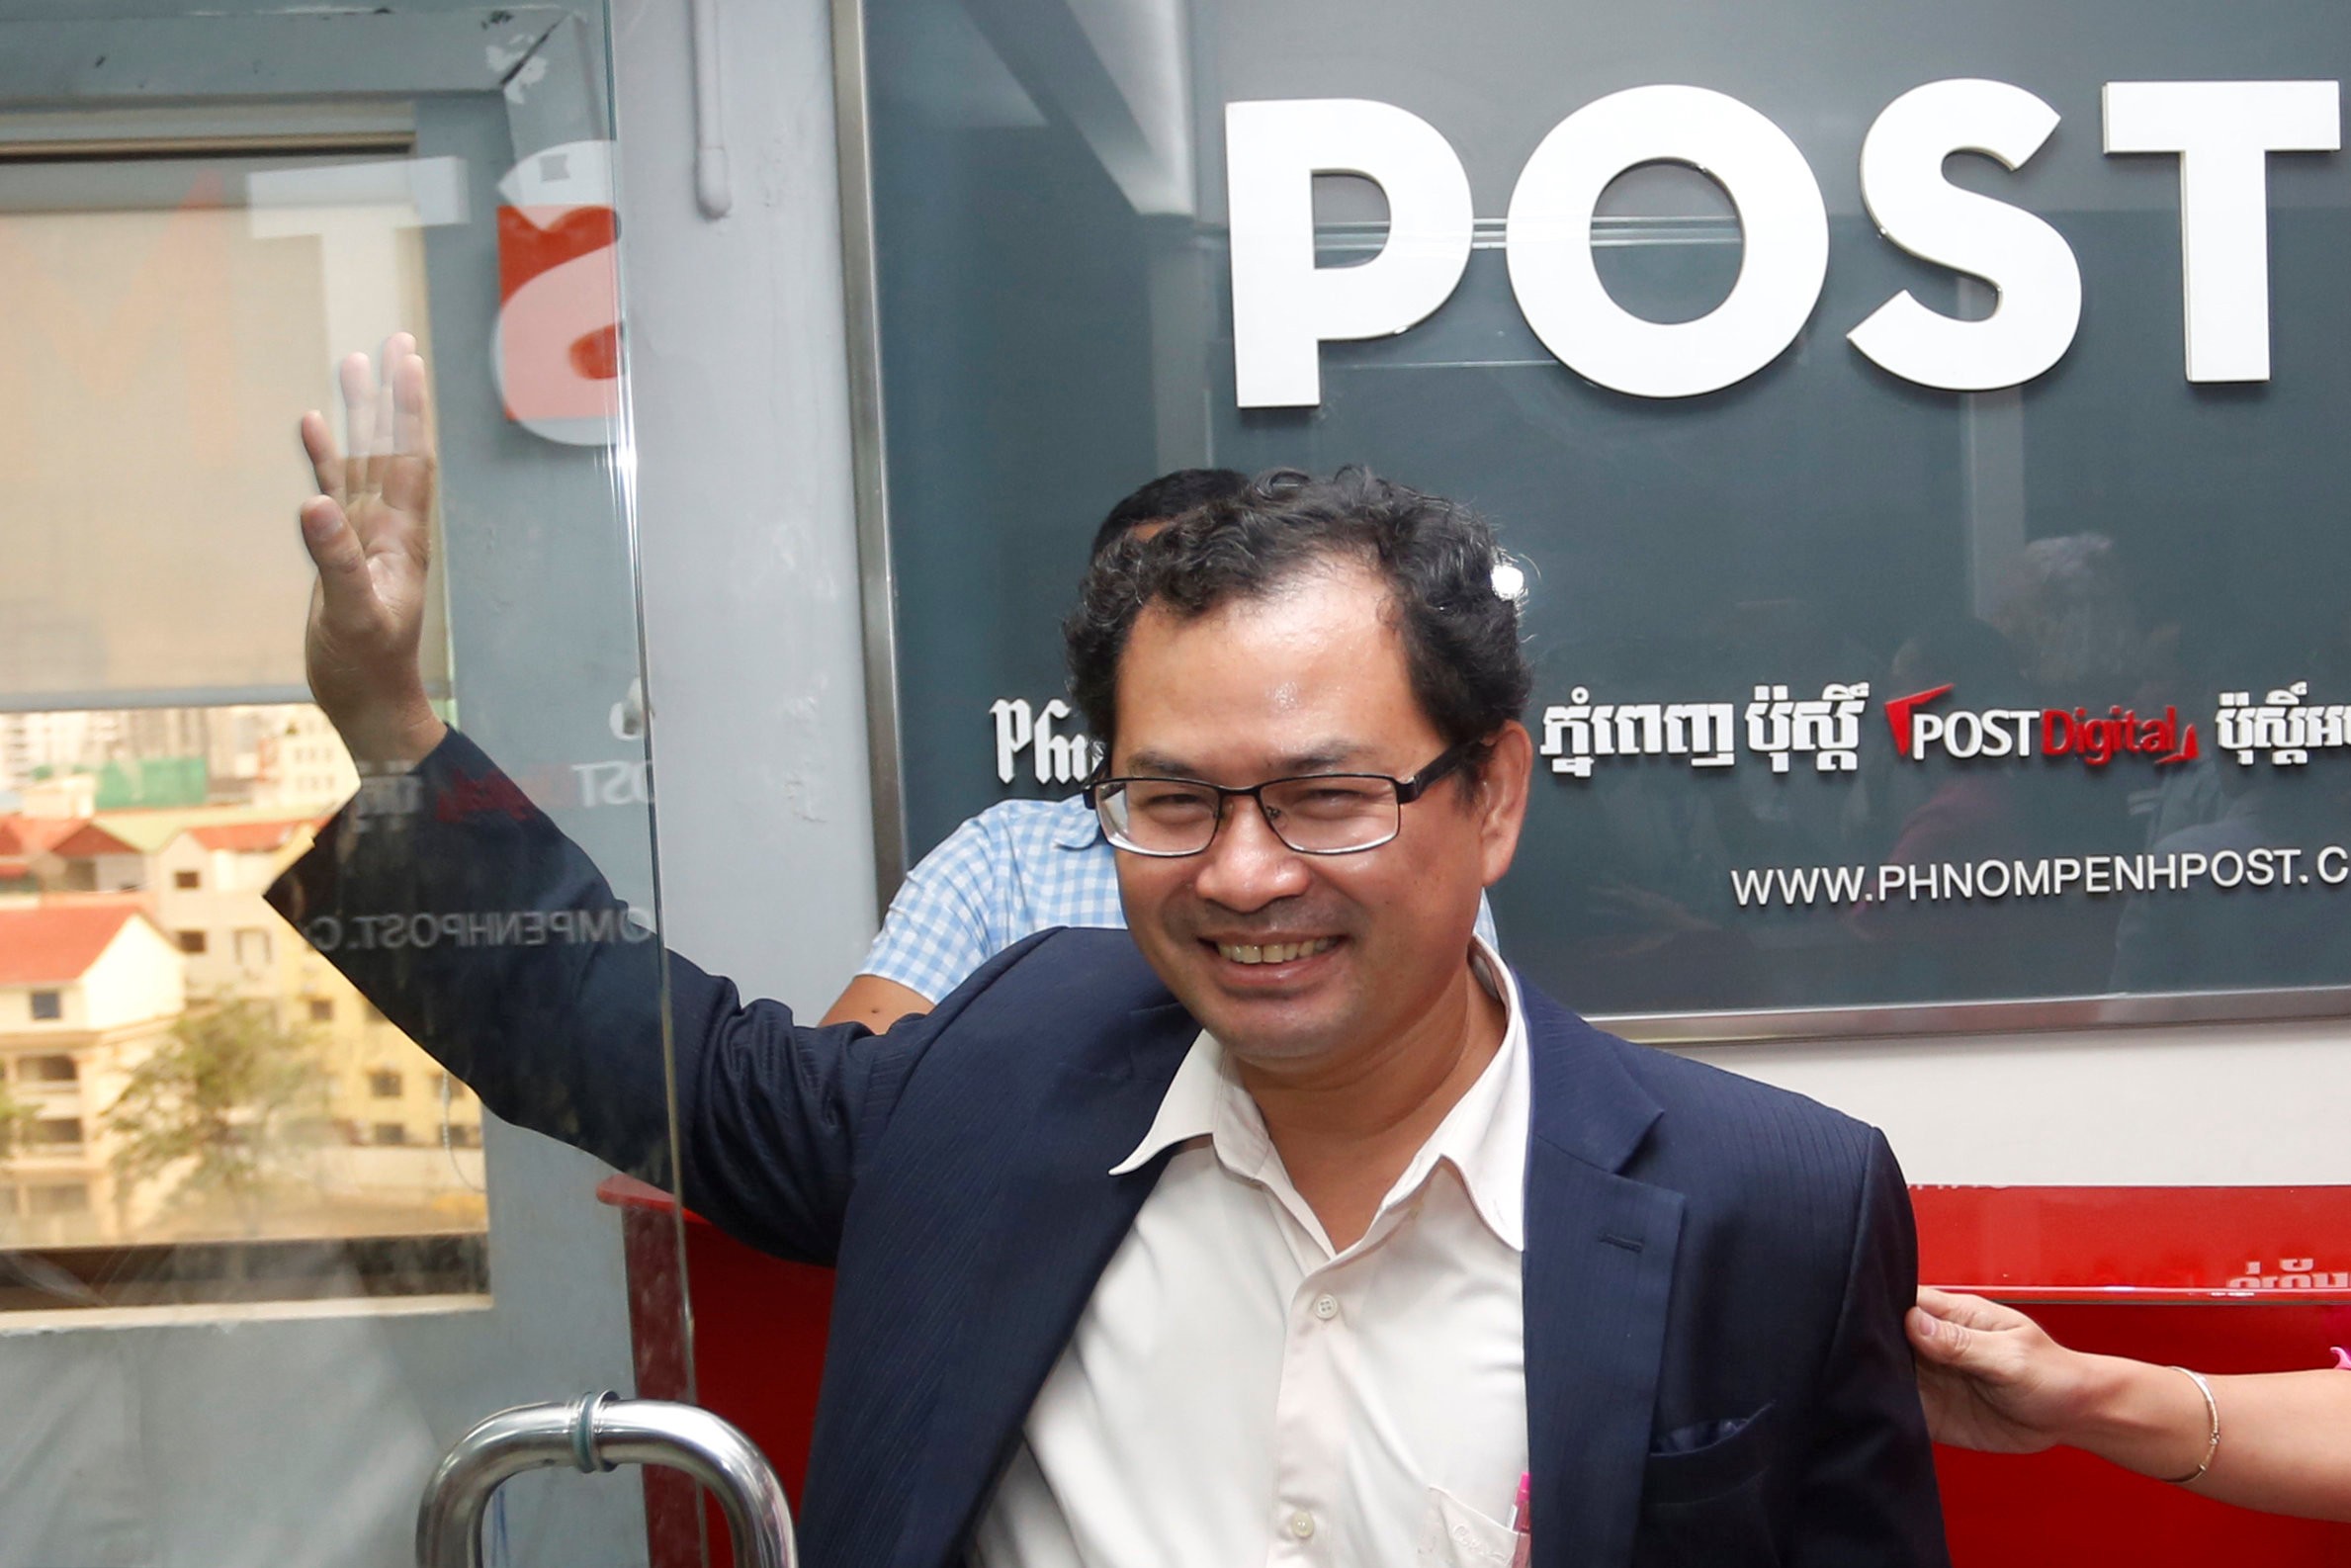 The 26-year-old Phnom Penh Post was sold to Malaysian investor Sivakumar S. Ganapathy over the weekend for an unknown sum